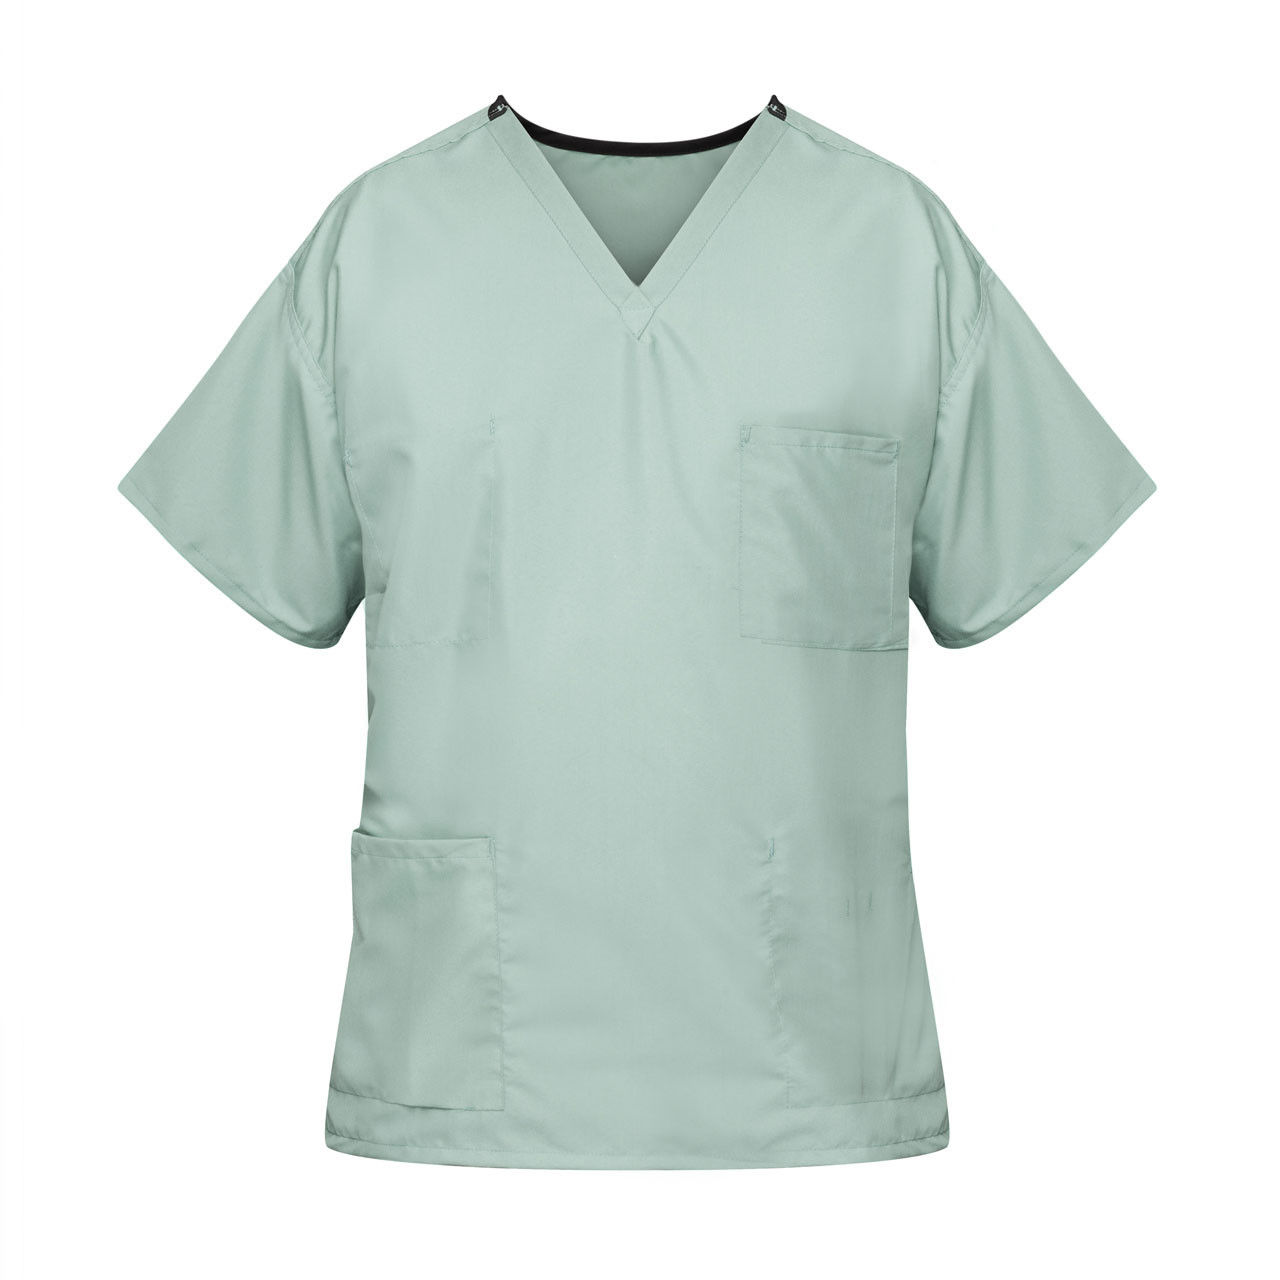 What is the method to determine the right size for misty green scrubs?